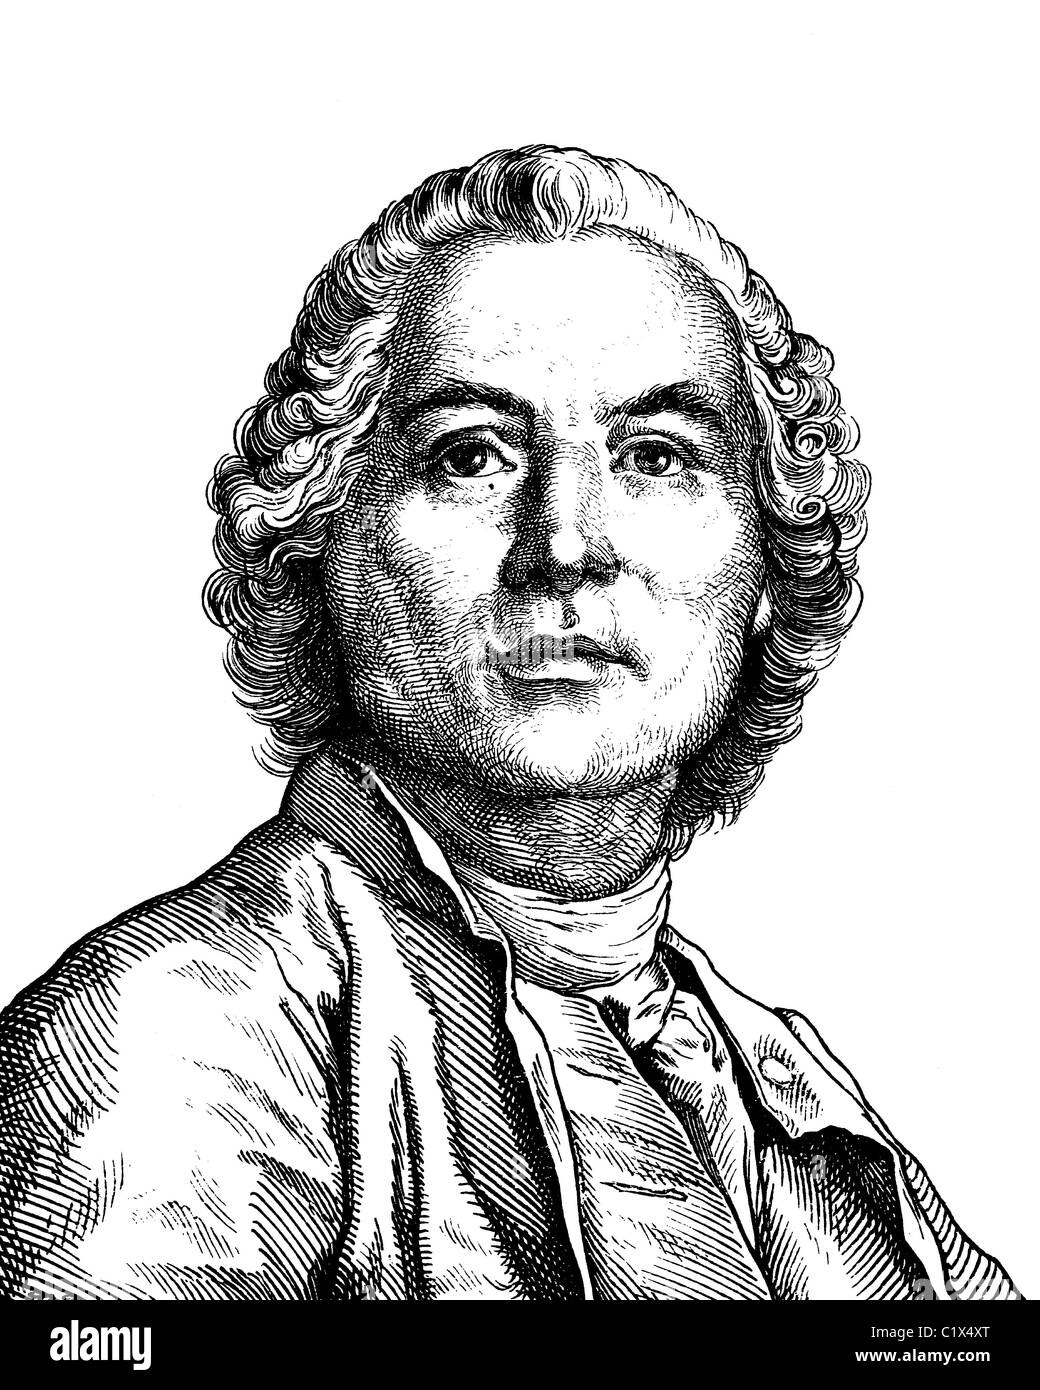 Digital improved image of Christoph Willibald Gluck, Ritter von Gluck, opera composer of the pre-classic, 1714 - 1787, historica Stock Photo